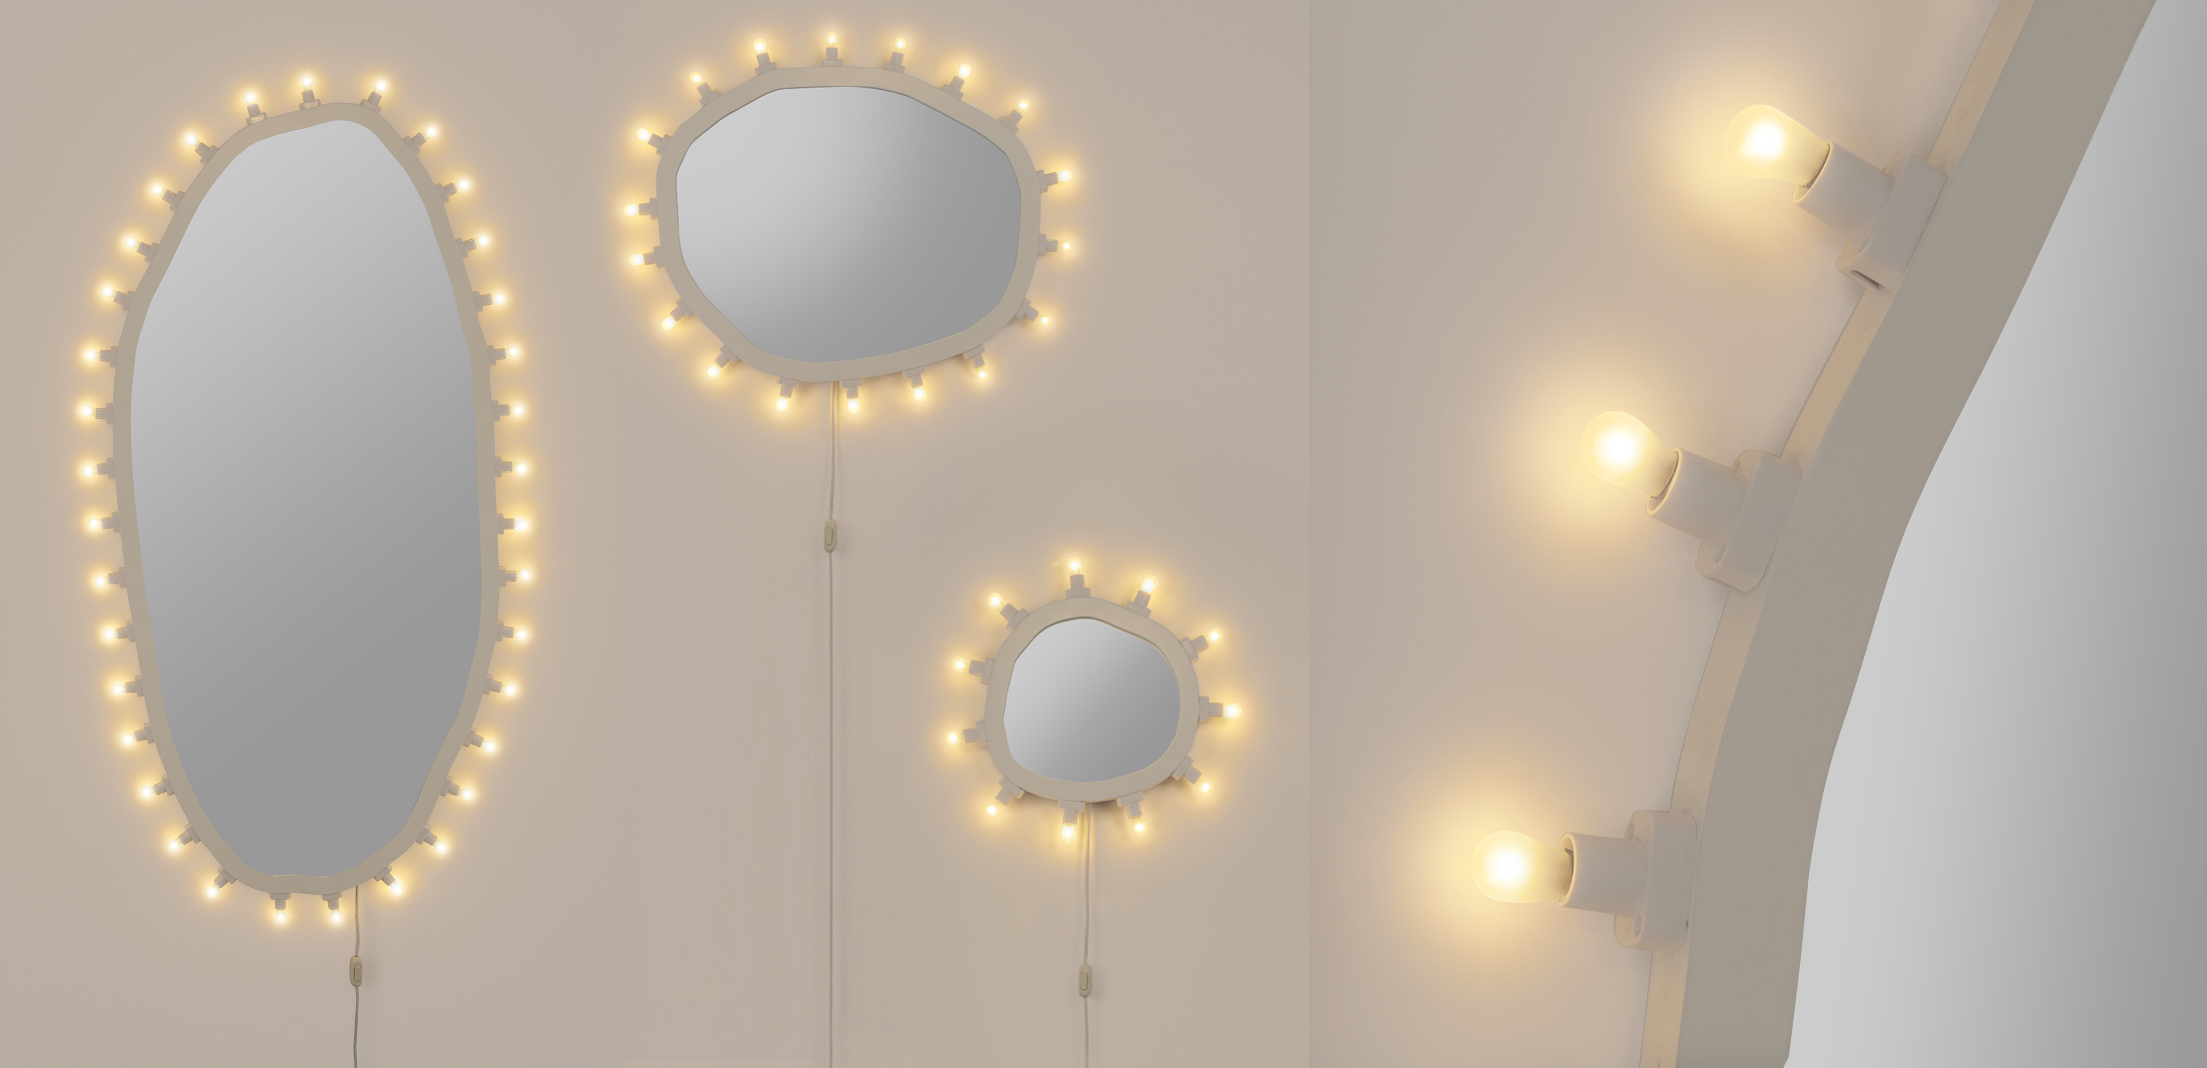 LUMINAIRE The lights of tradition in a mirror - Marcantonio design